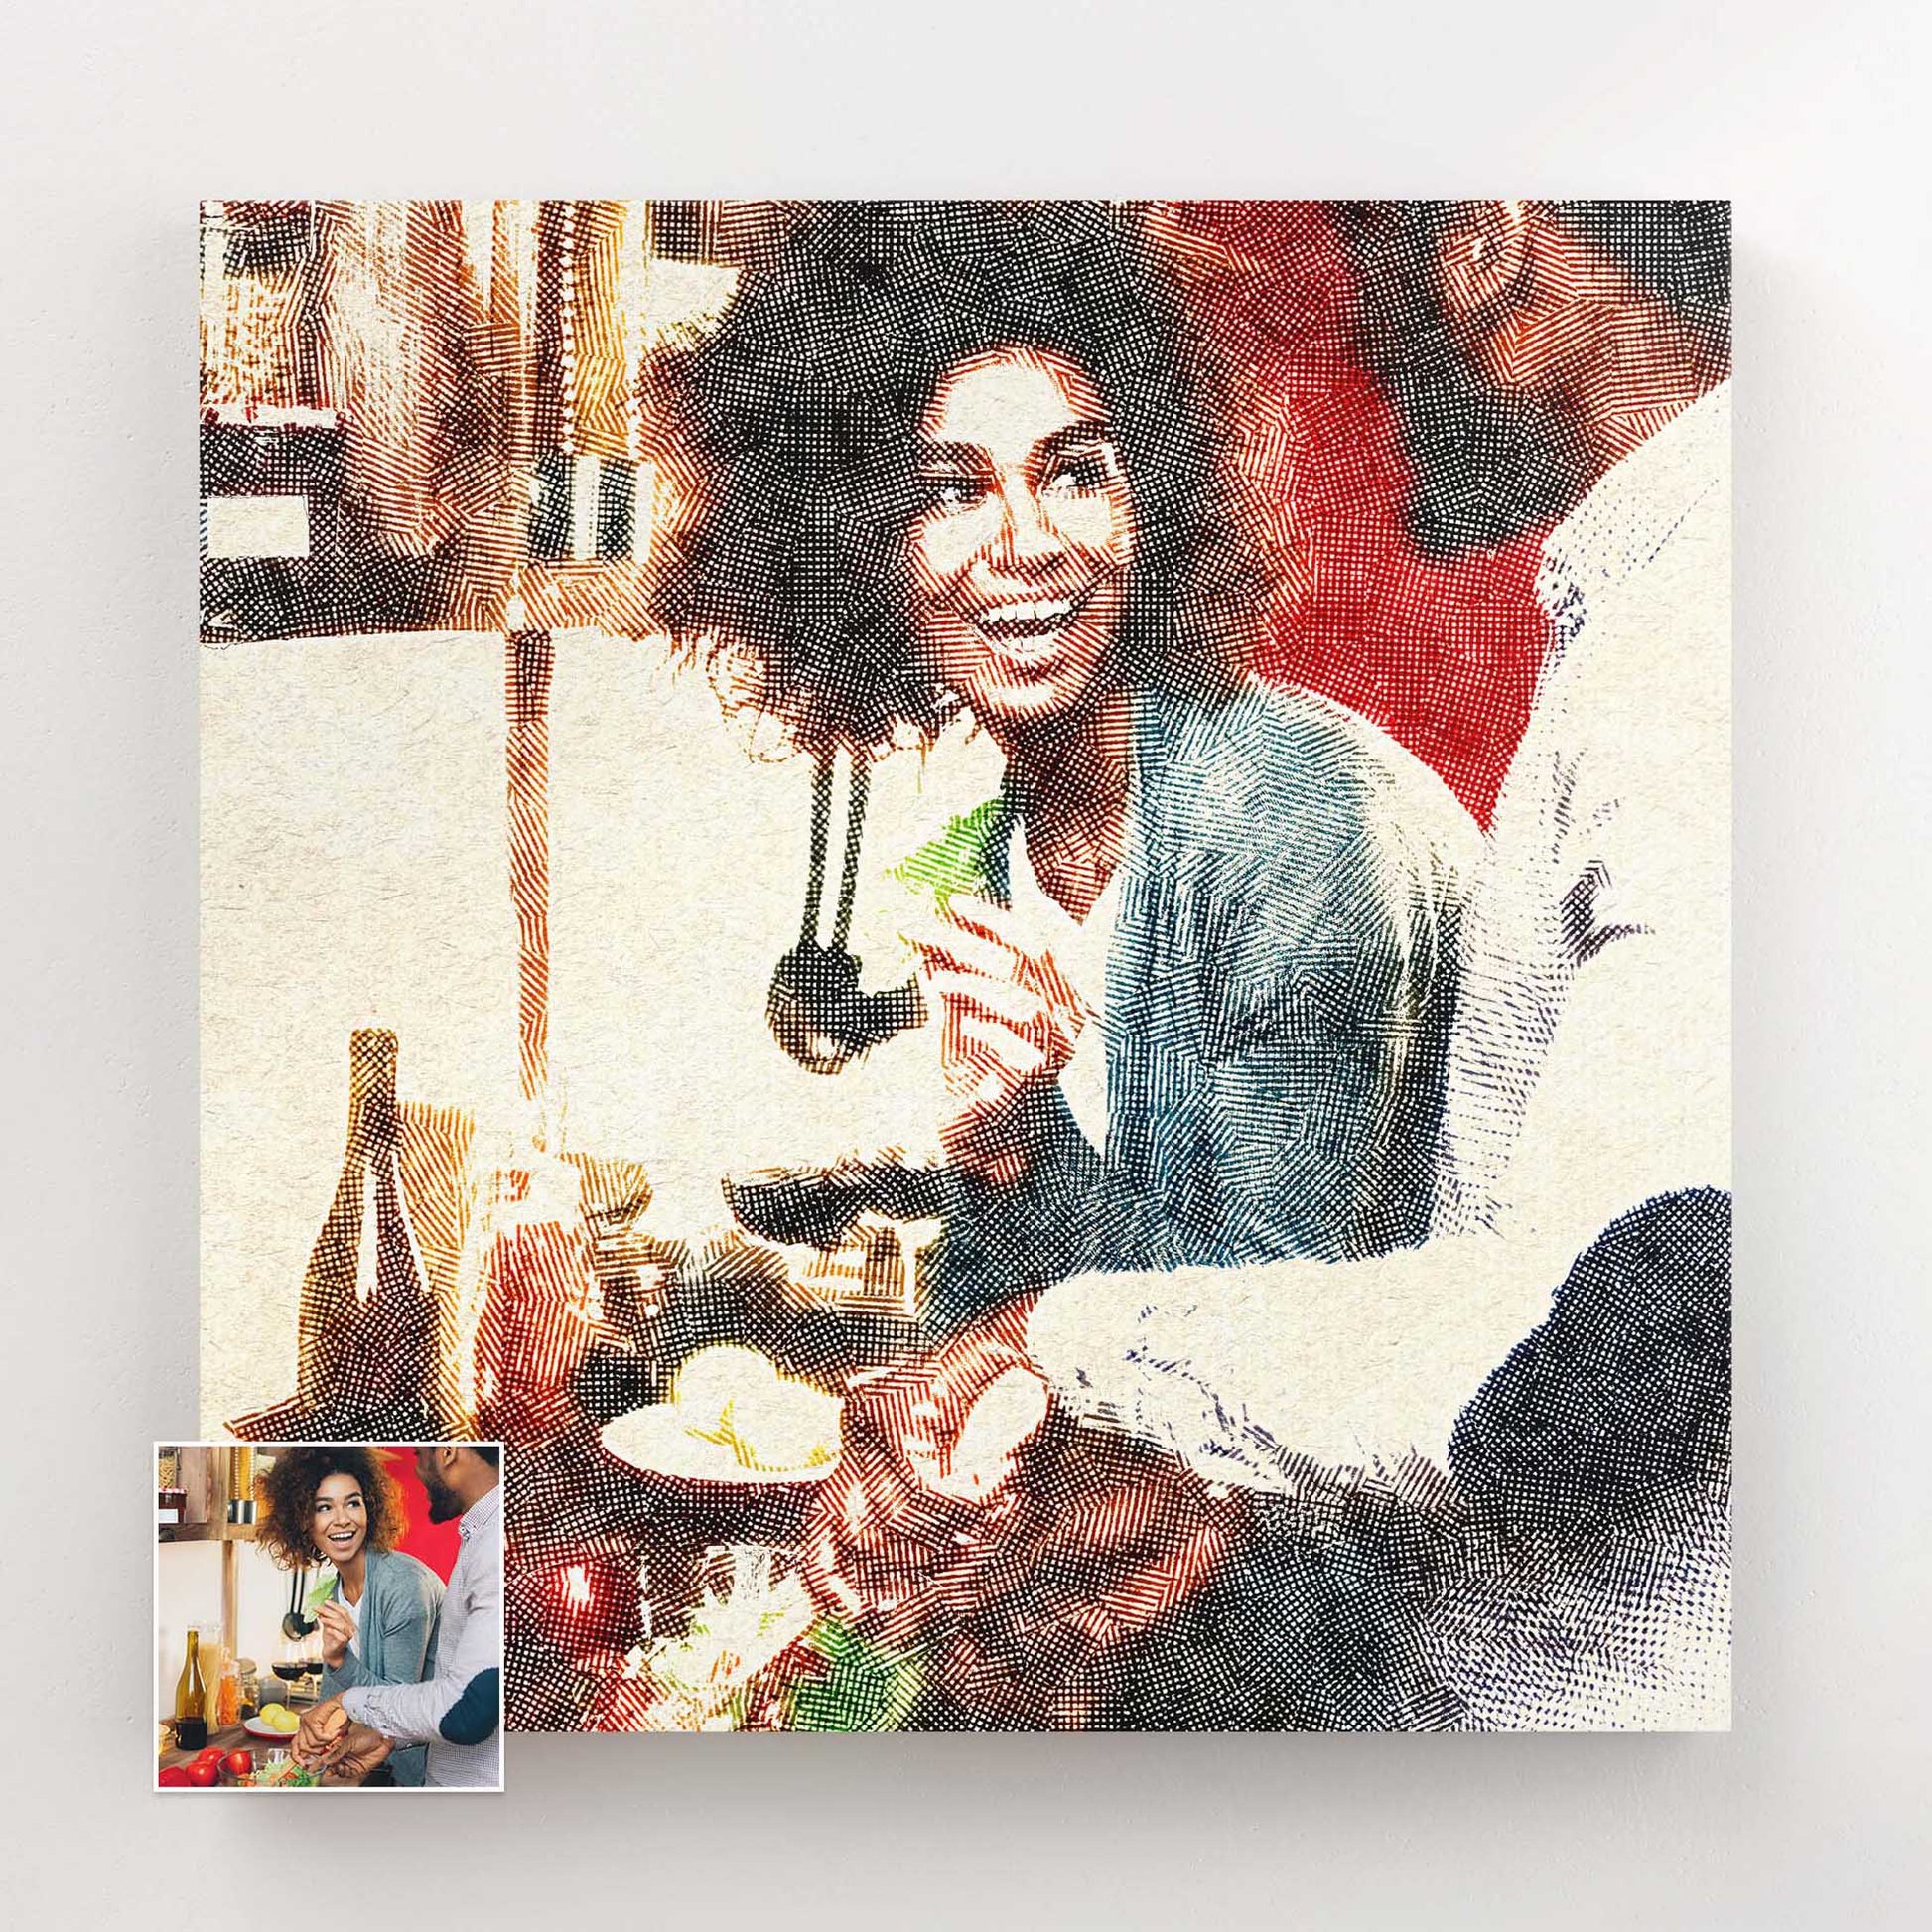 Indulge in the beauty of our Personalised Crosshatch Canvas, an elegant and modern artwork with a natural look. Painting from your photo, we bring the crosshatch detailing to life, creating a texture and fabric-like feel on the real canvas